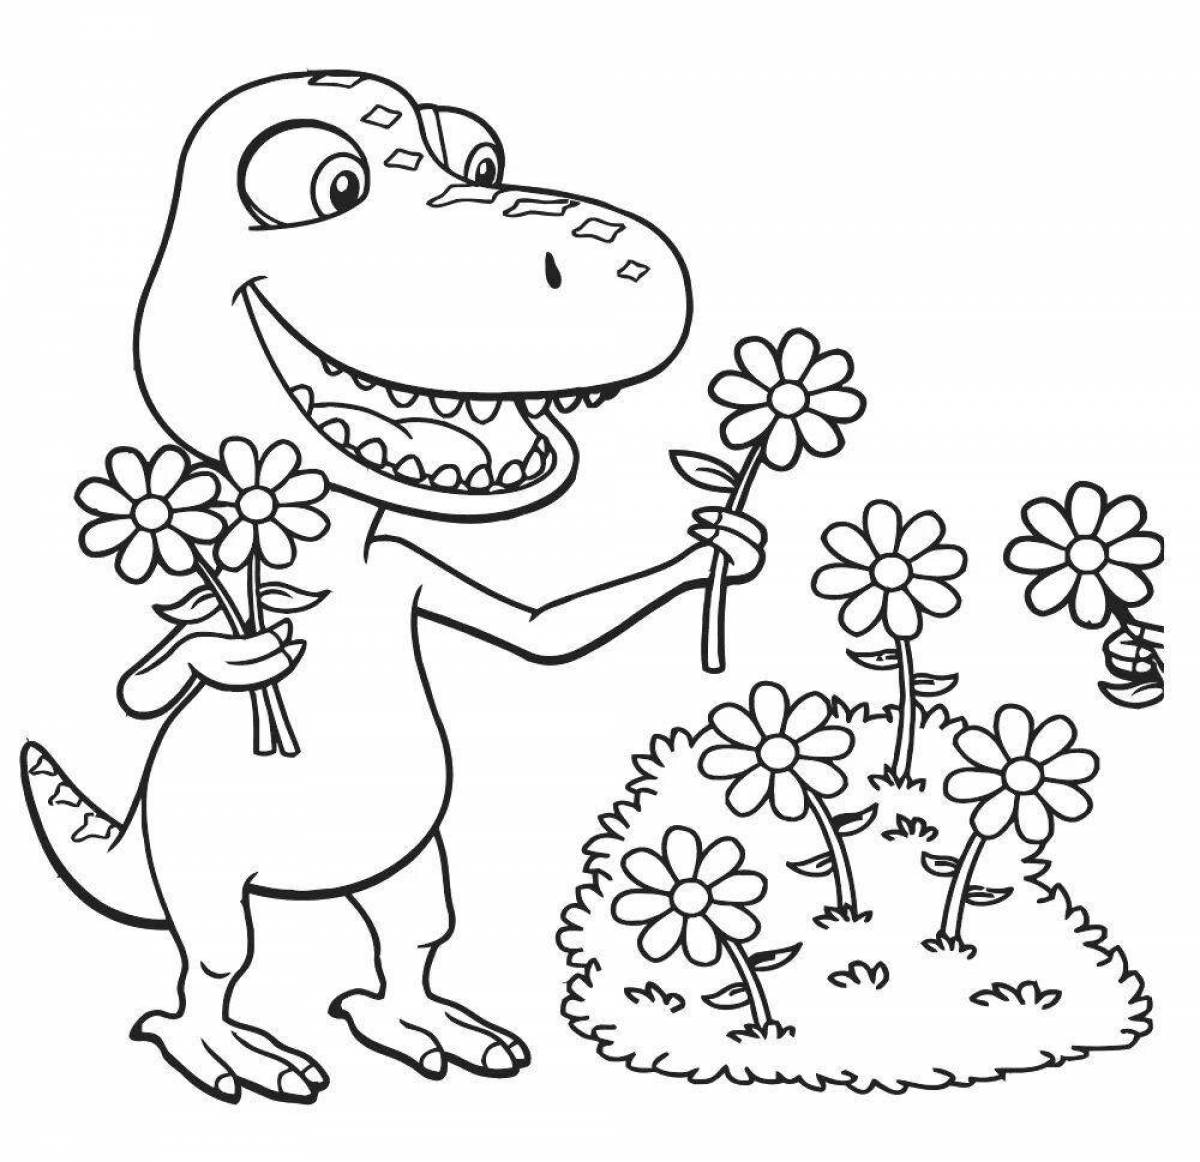 Fearless turbosaur coloring page